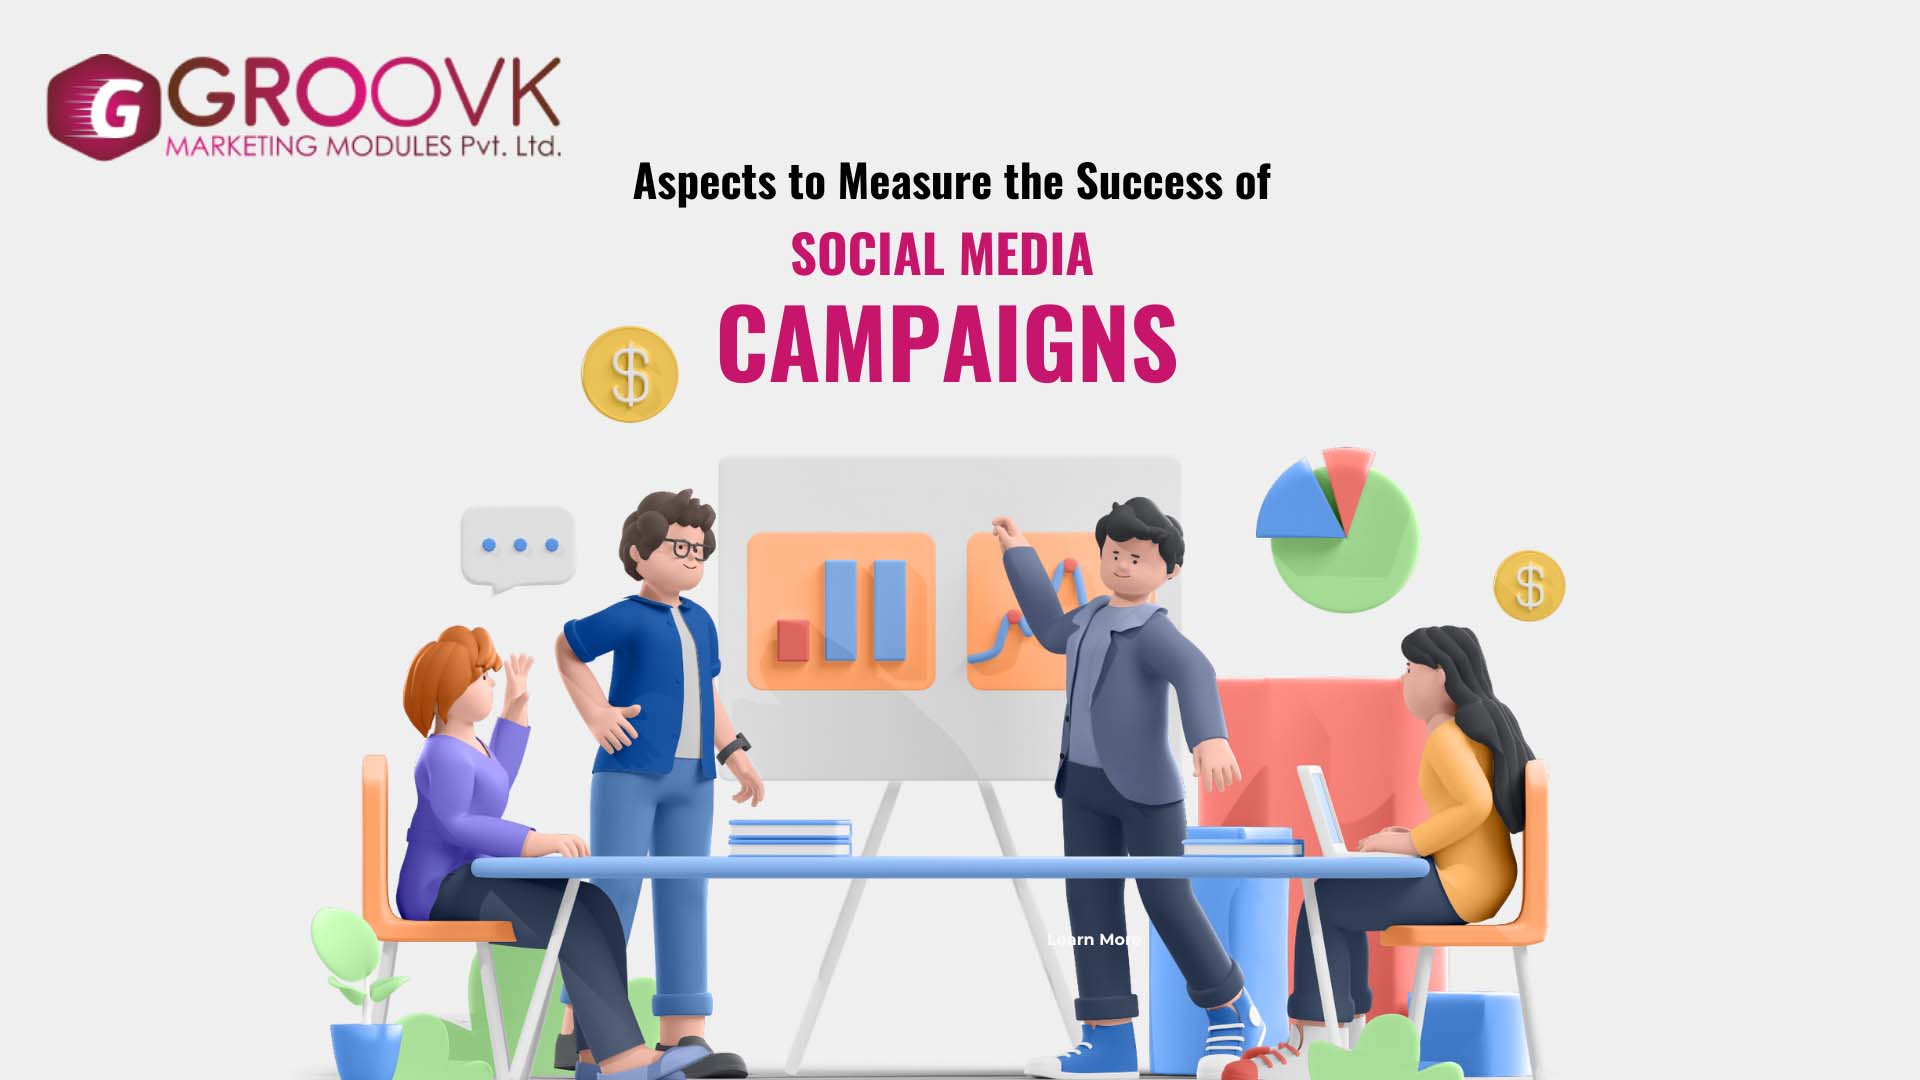 Aspects to Measure the Success of Social Media Campaigns